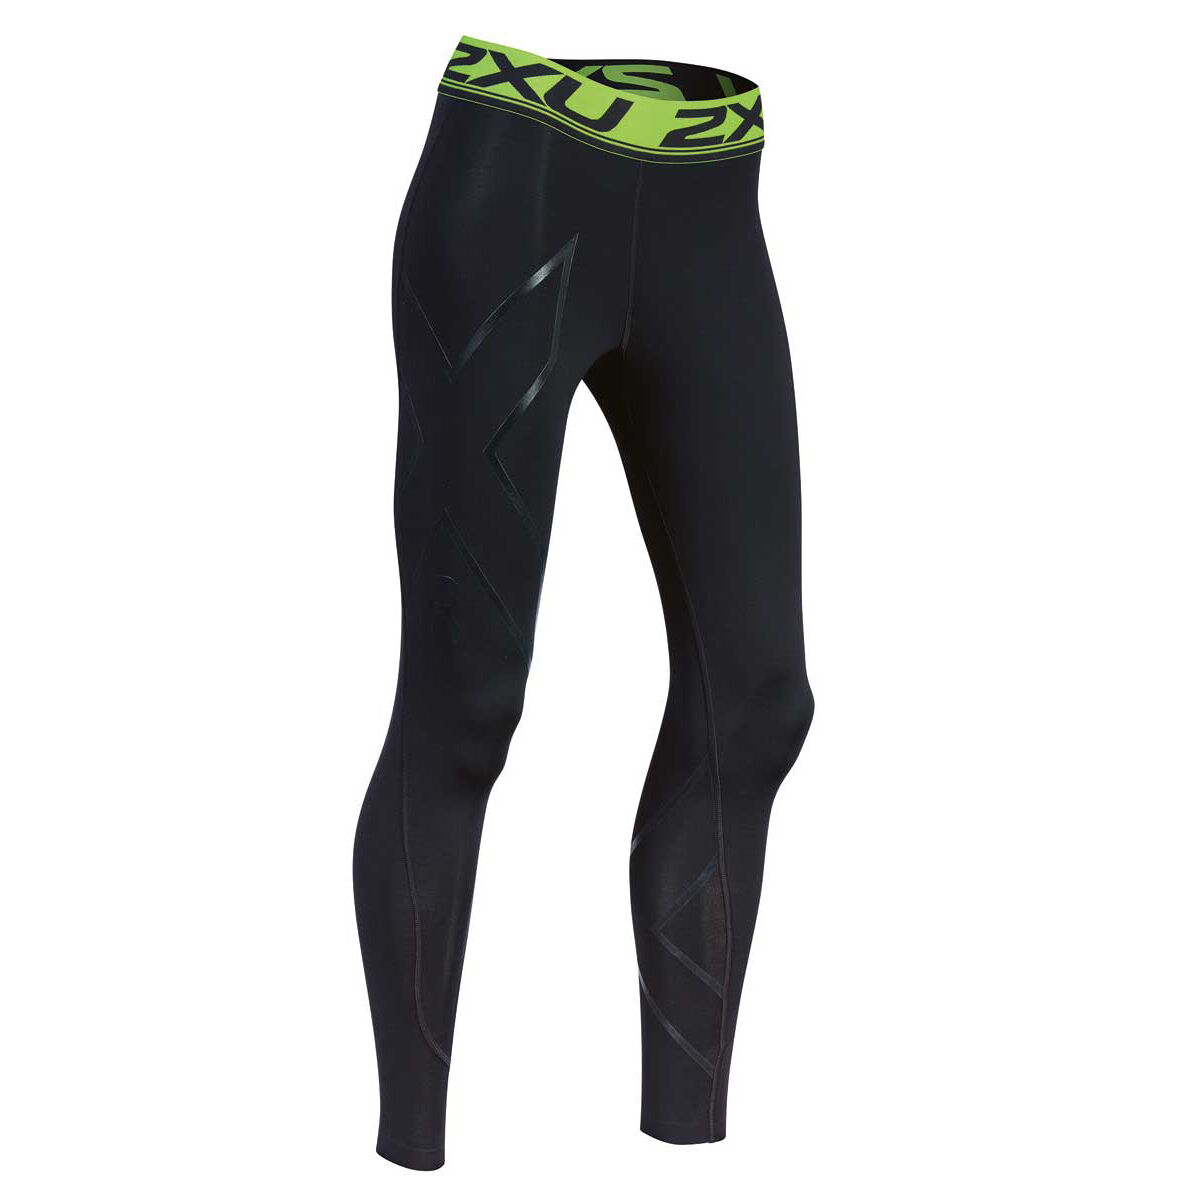 Recovery Compression Tights, Women